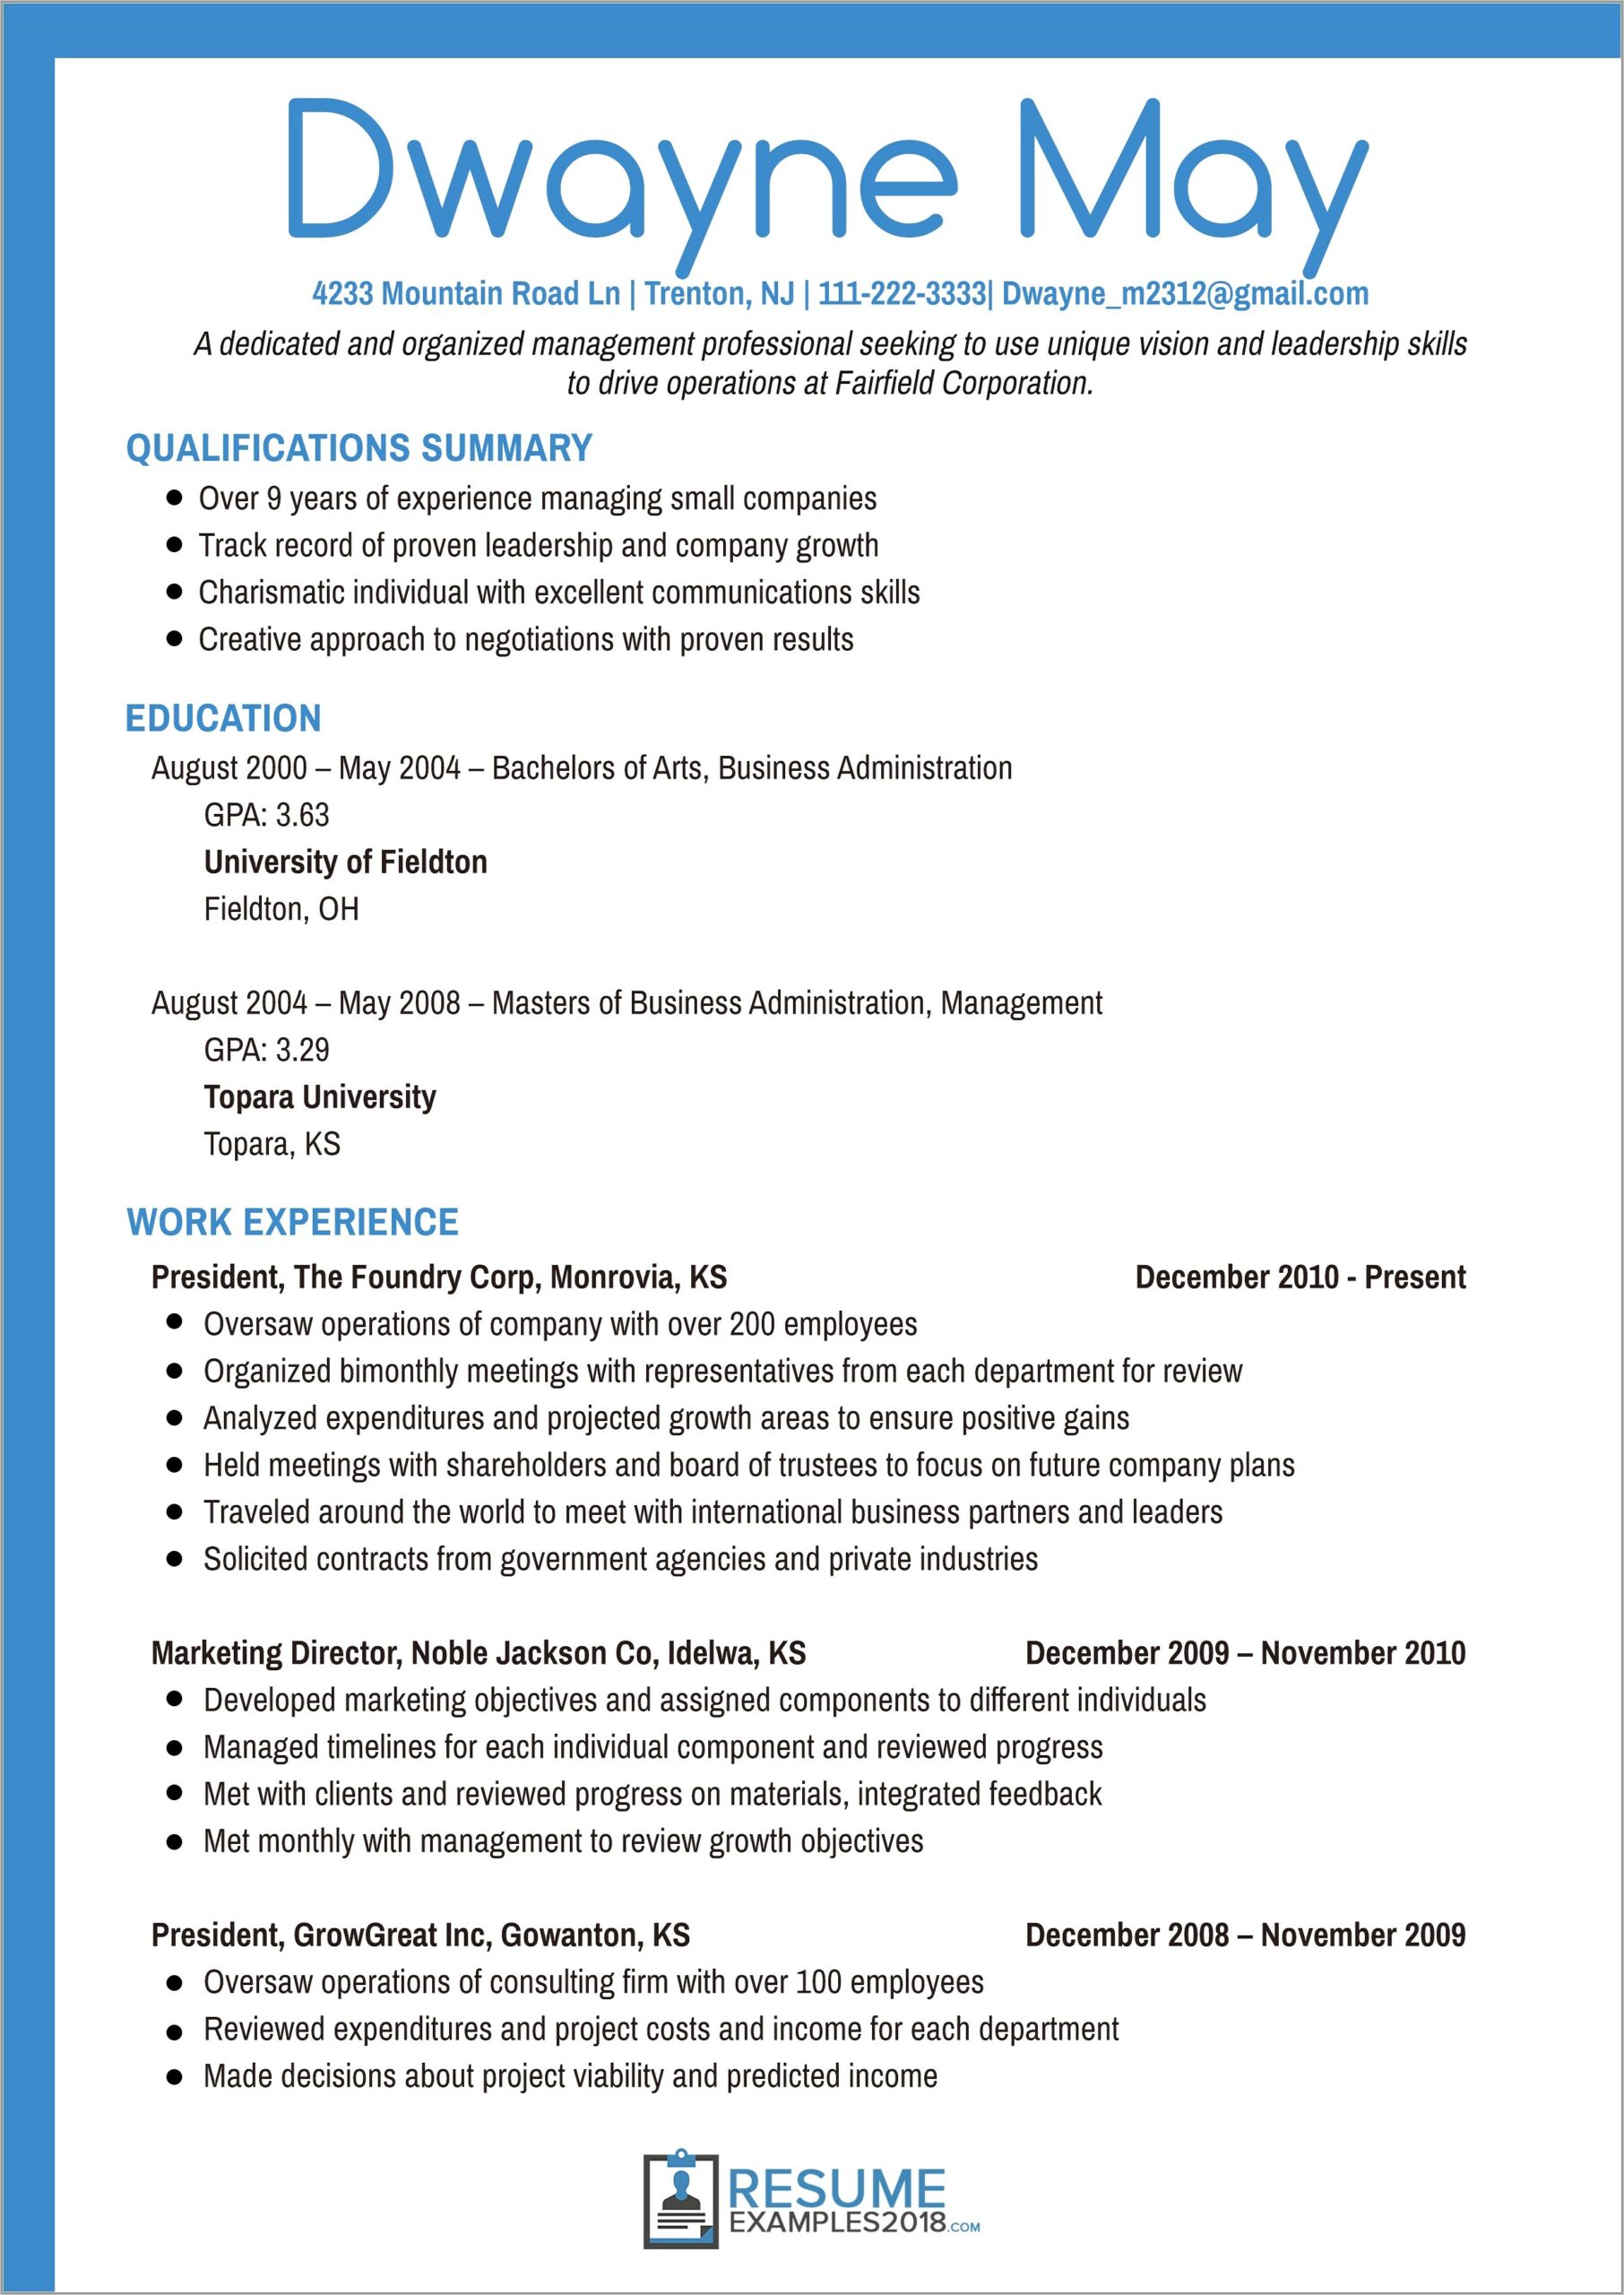 Best Executive Resume Examples 2018